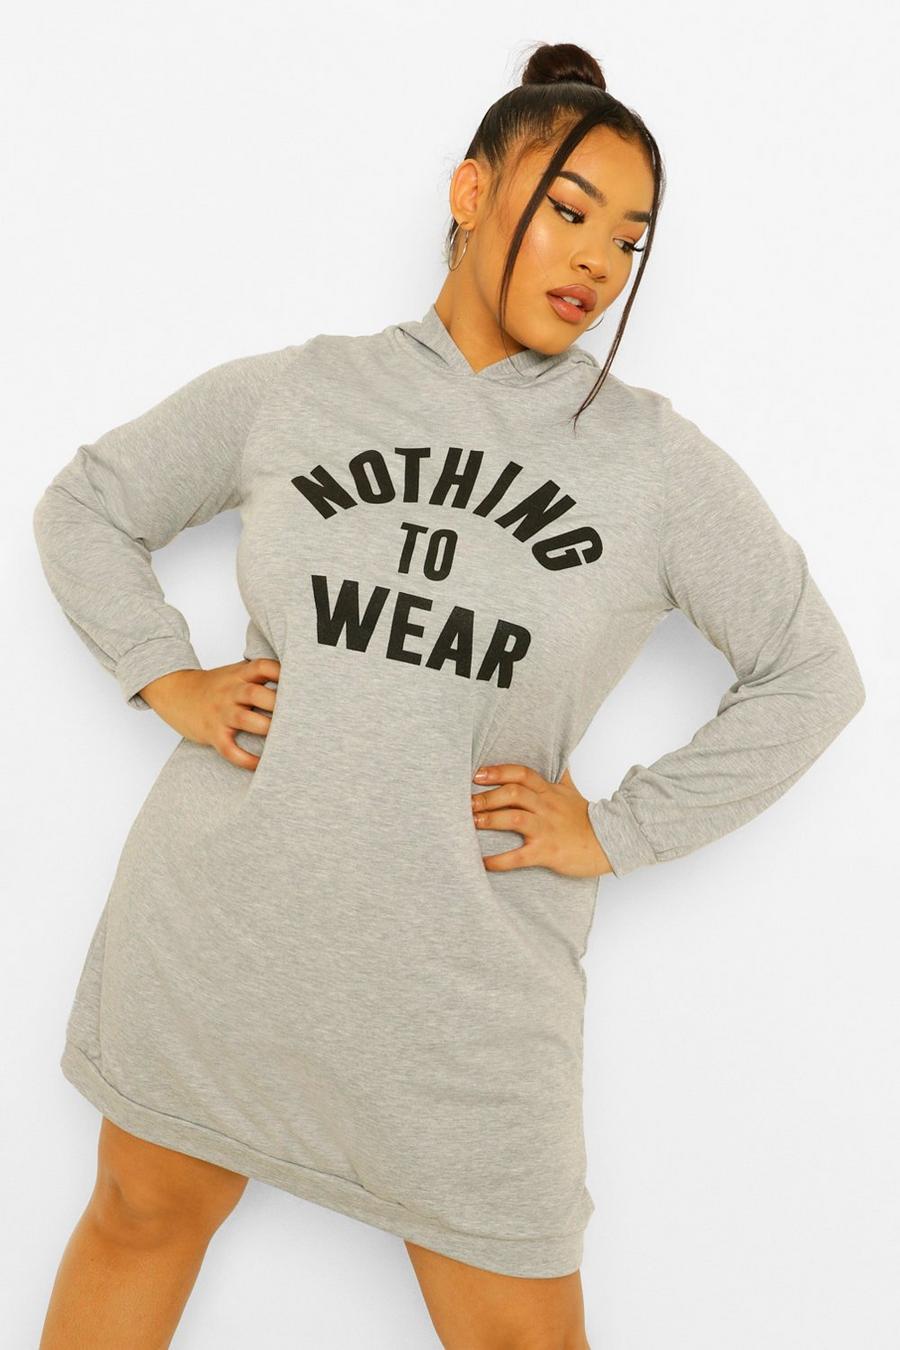 Grande taille - Robe sweat à capuche "Nothing To Wear" image number 1